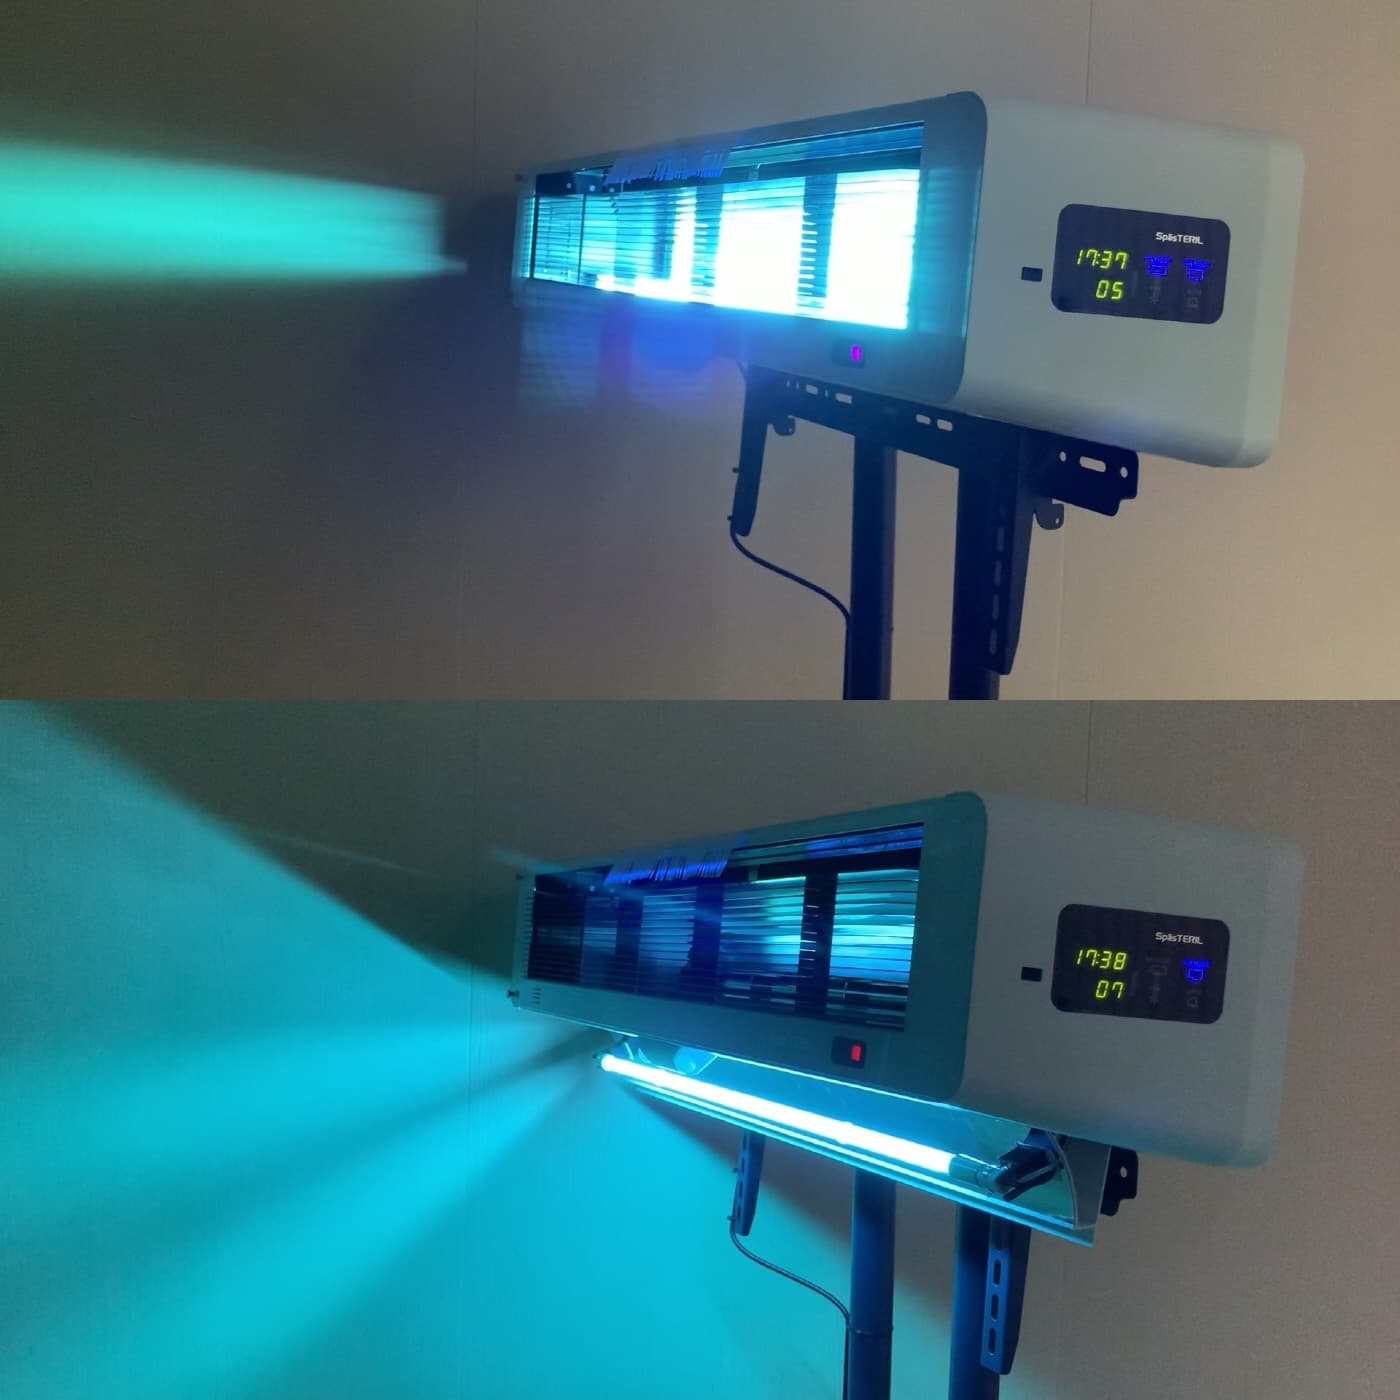 SpasTERIL COVID19 related UV virus disinfection system